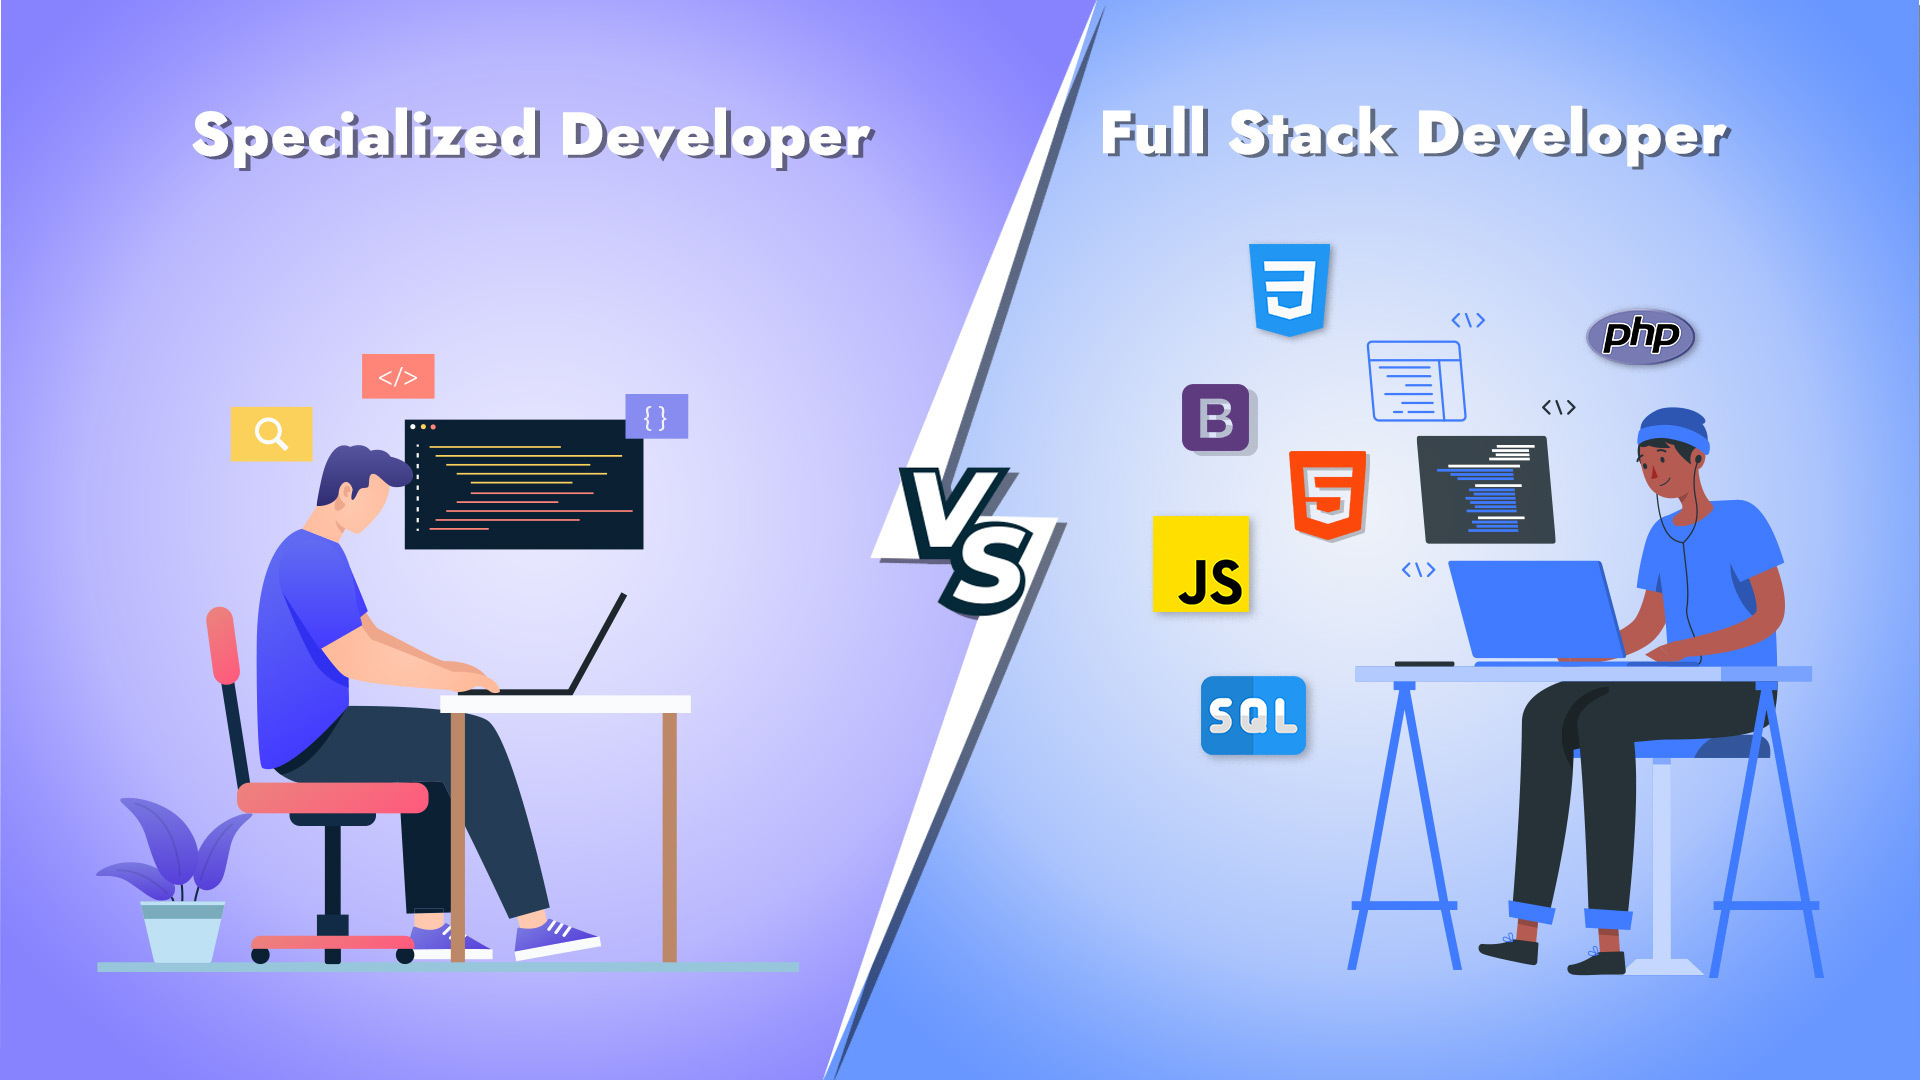 Future-Proofing Your Project: Choose Between Full Stack and Specialized Developers in 2023